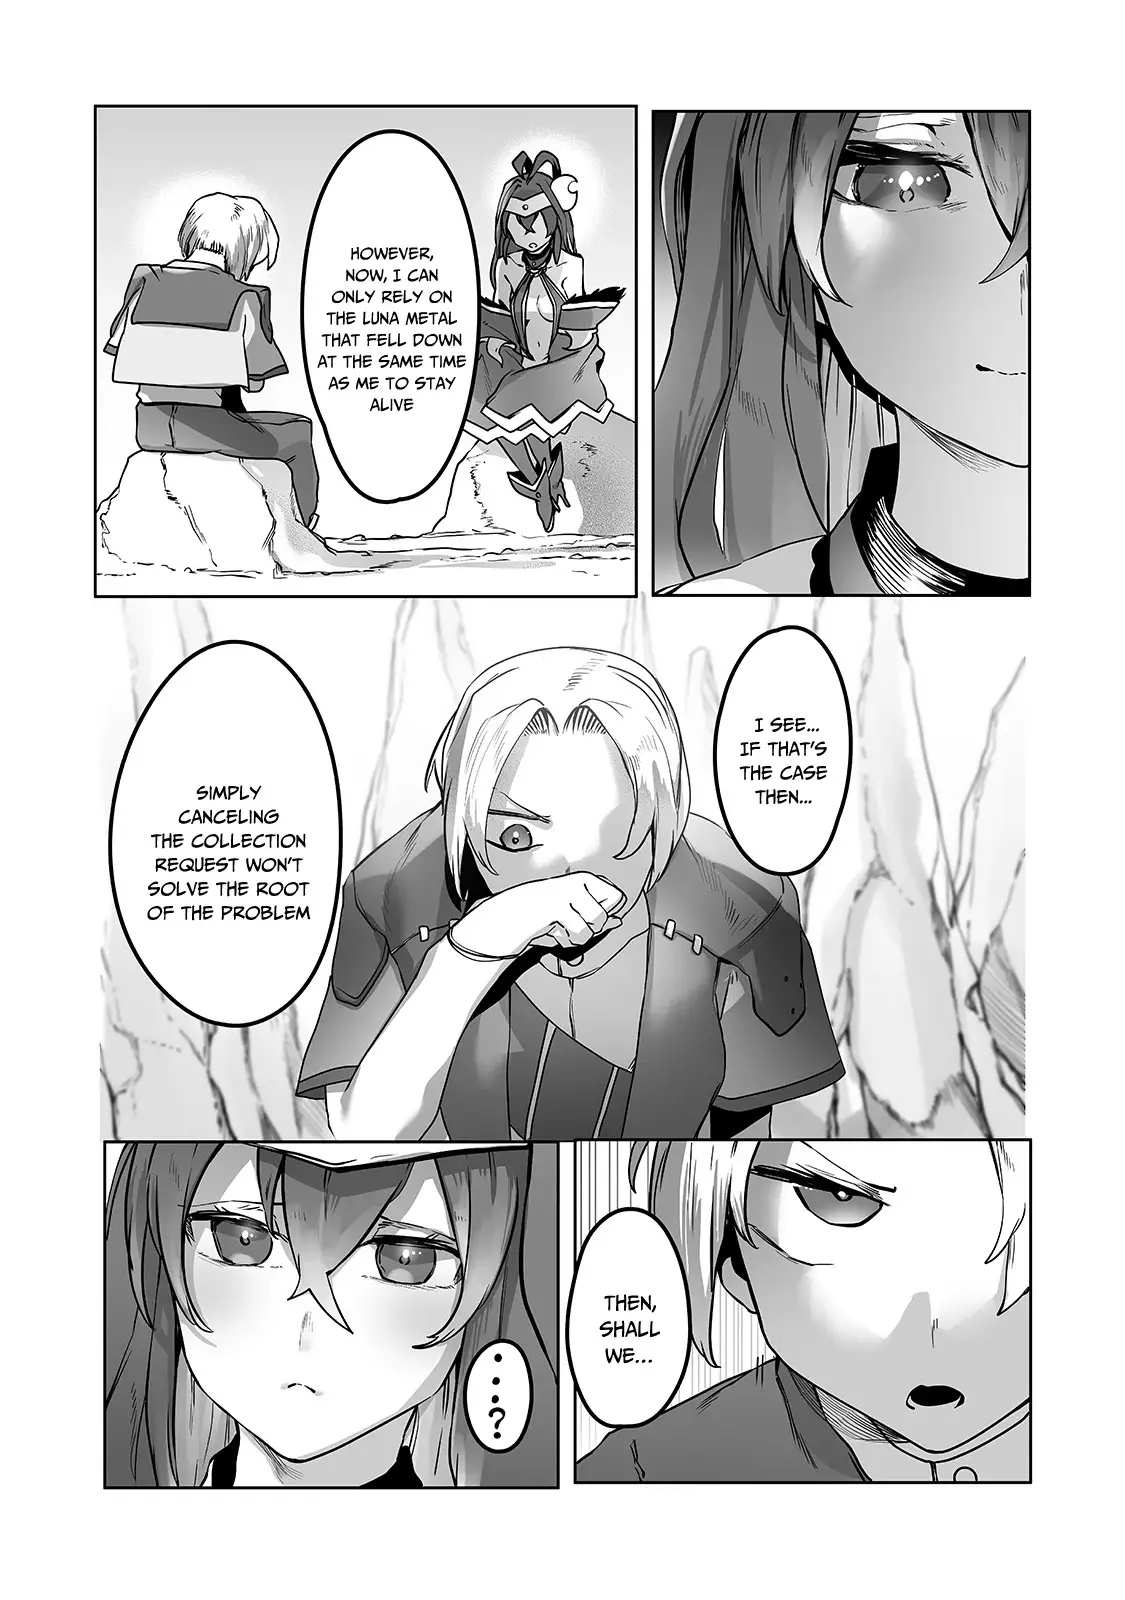 The Useless Tamer Will Turn Into The Top Unconsciously By My Previous Life Knowledge - 10 page 12